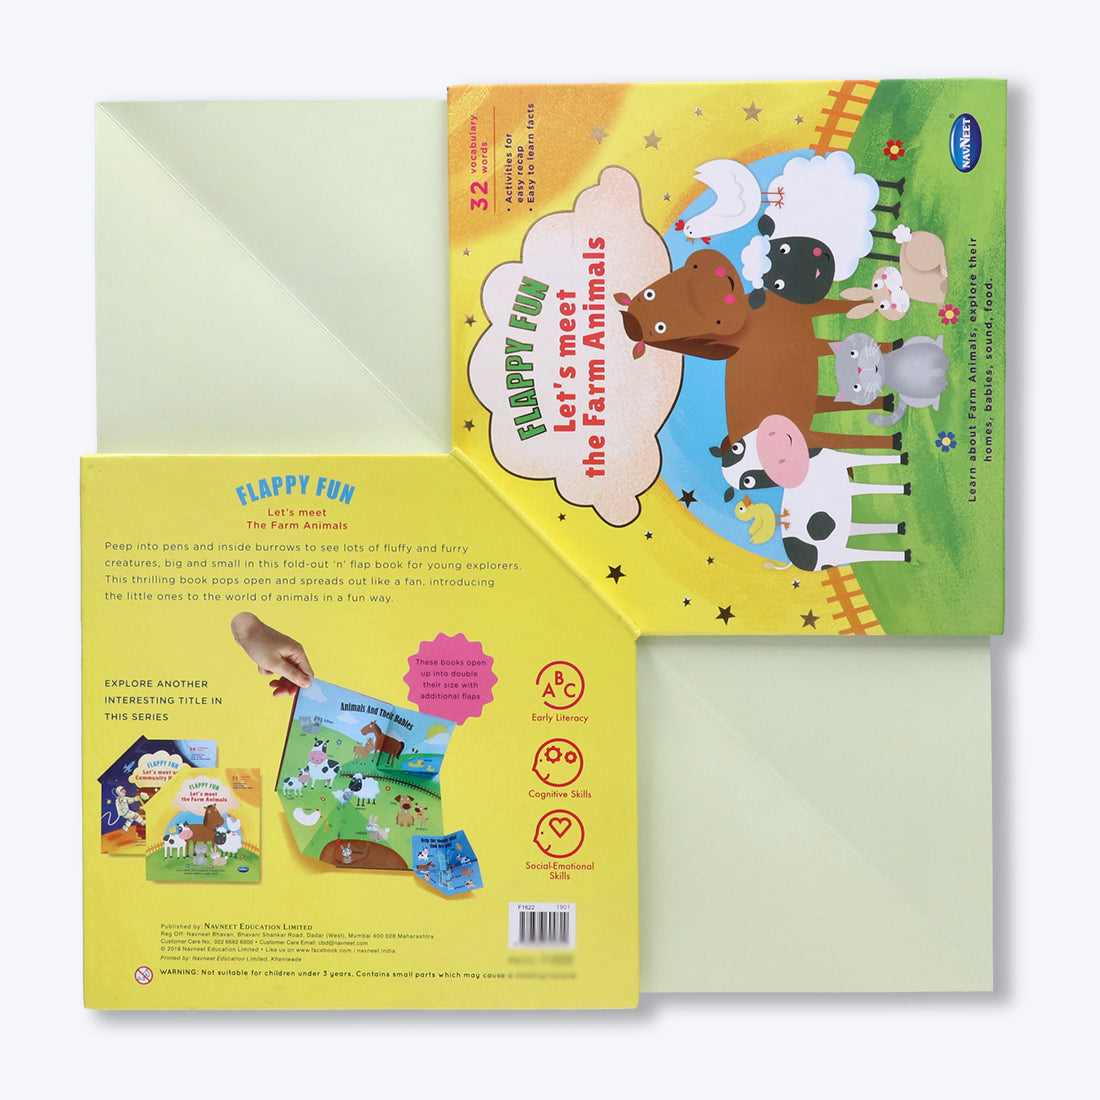 Navneet Flappy Fun Picture Book for preschoolers– Let’s meet the Farm Animals- Innovative Pop-Up Book for gifting- Learn about farm animals & their homes, babies, sound, and food.